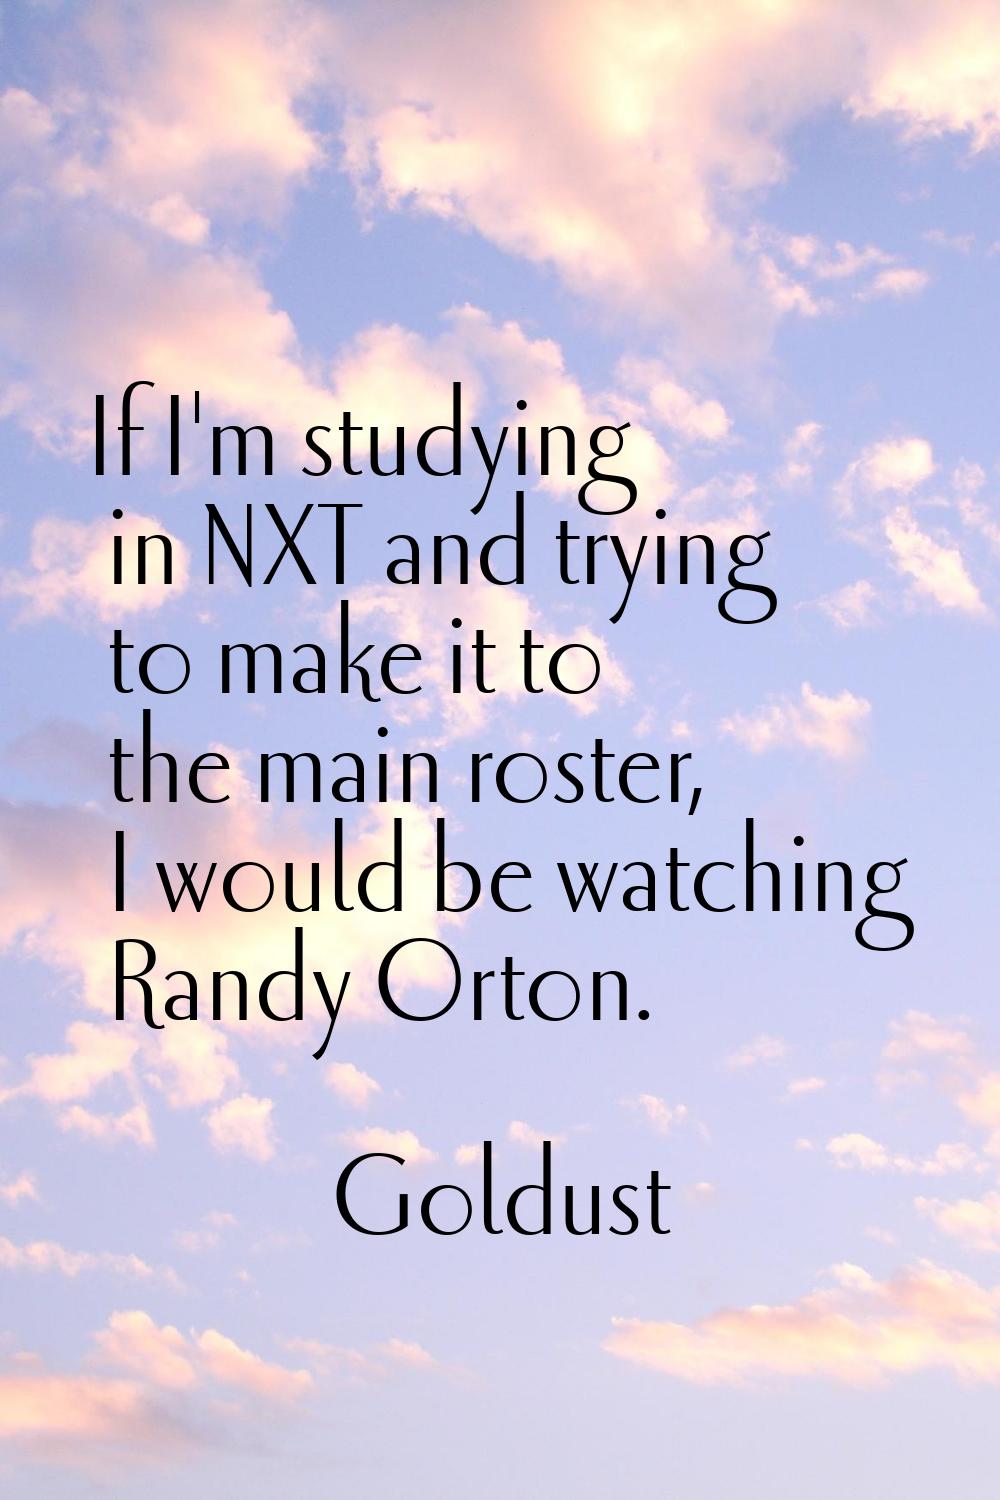 If I'm studying in NXT and trying to make it to the main roster, I would be watching Randy Orton.